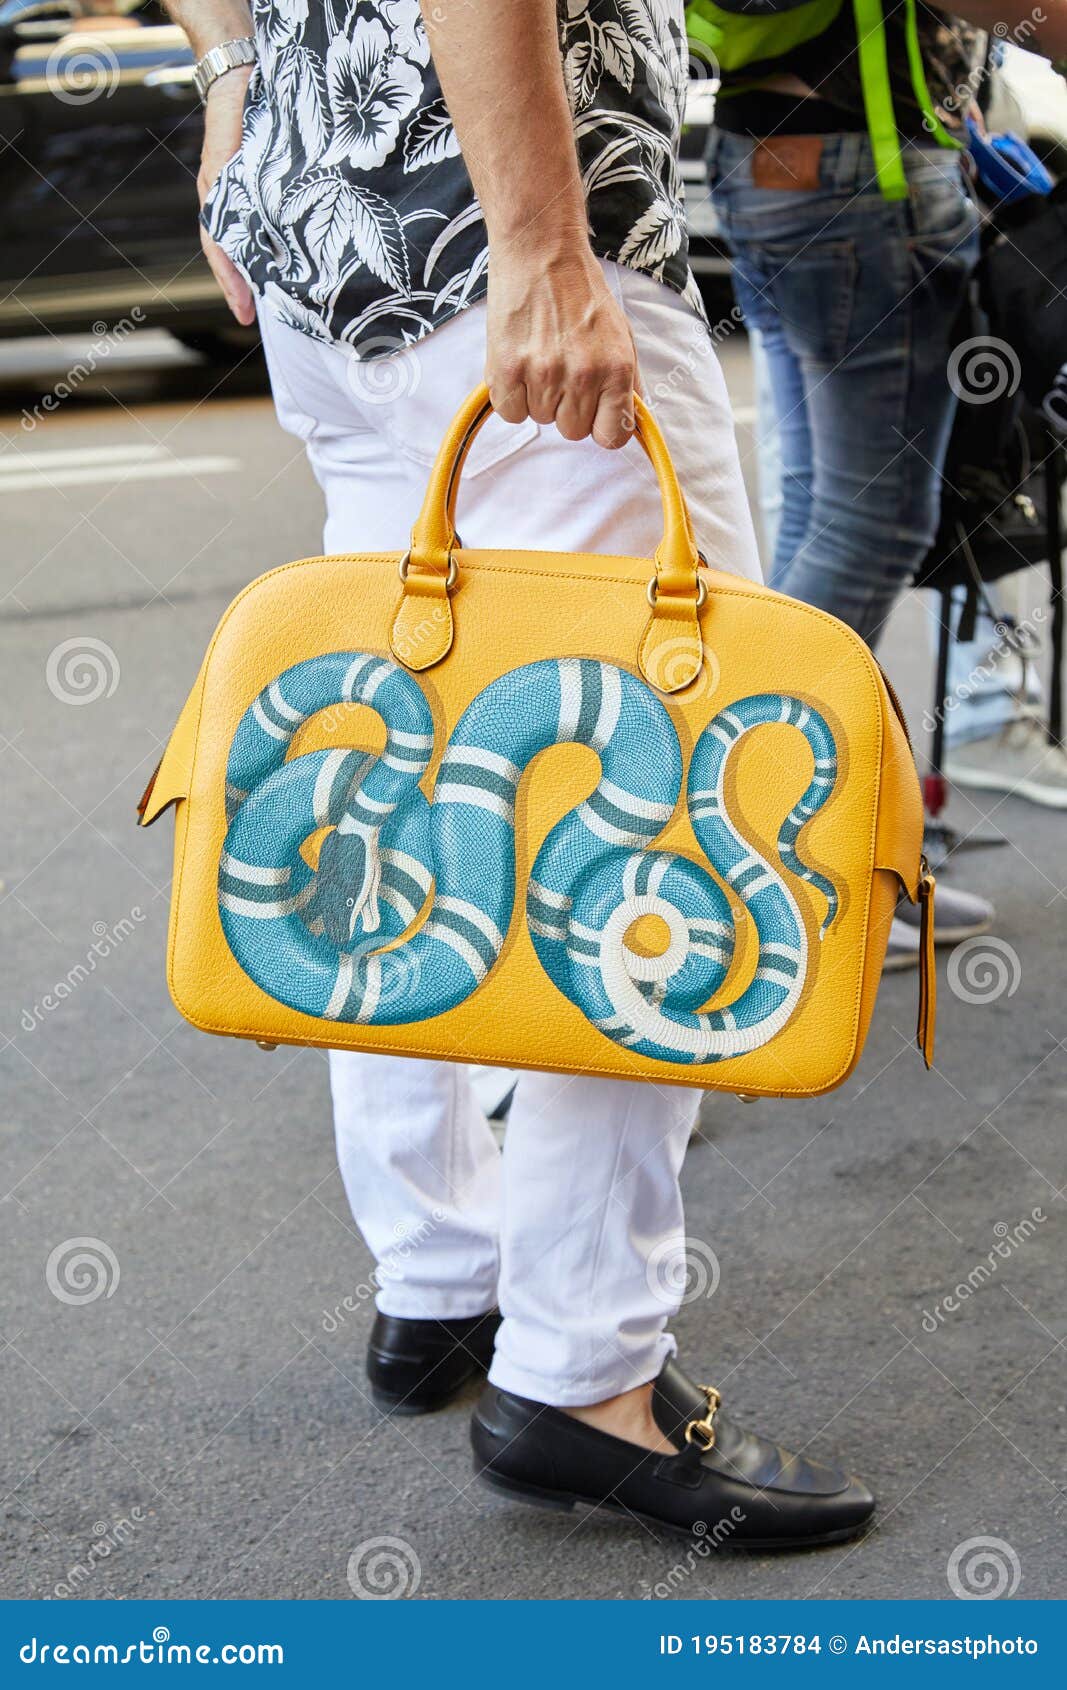 Man with with Gucci Bag with Blue Snake and White Trousers before Les Hommes Fashion Show, Milan Fashion Editorial Stock Image - Image of week, blue: 195183784